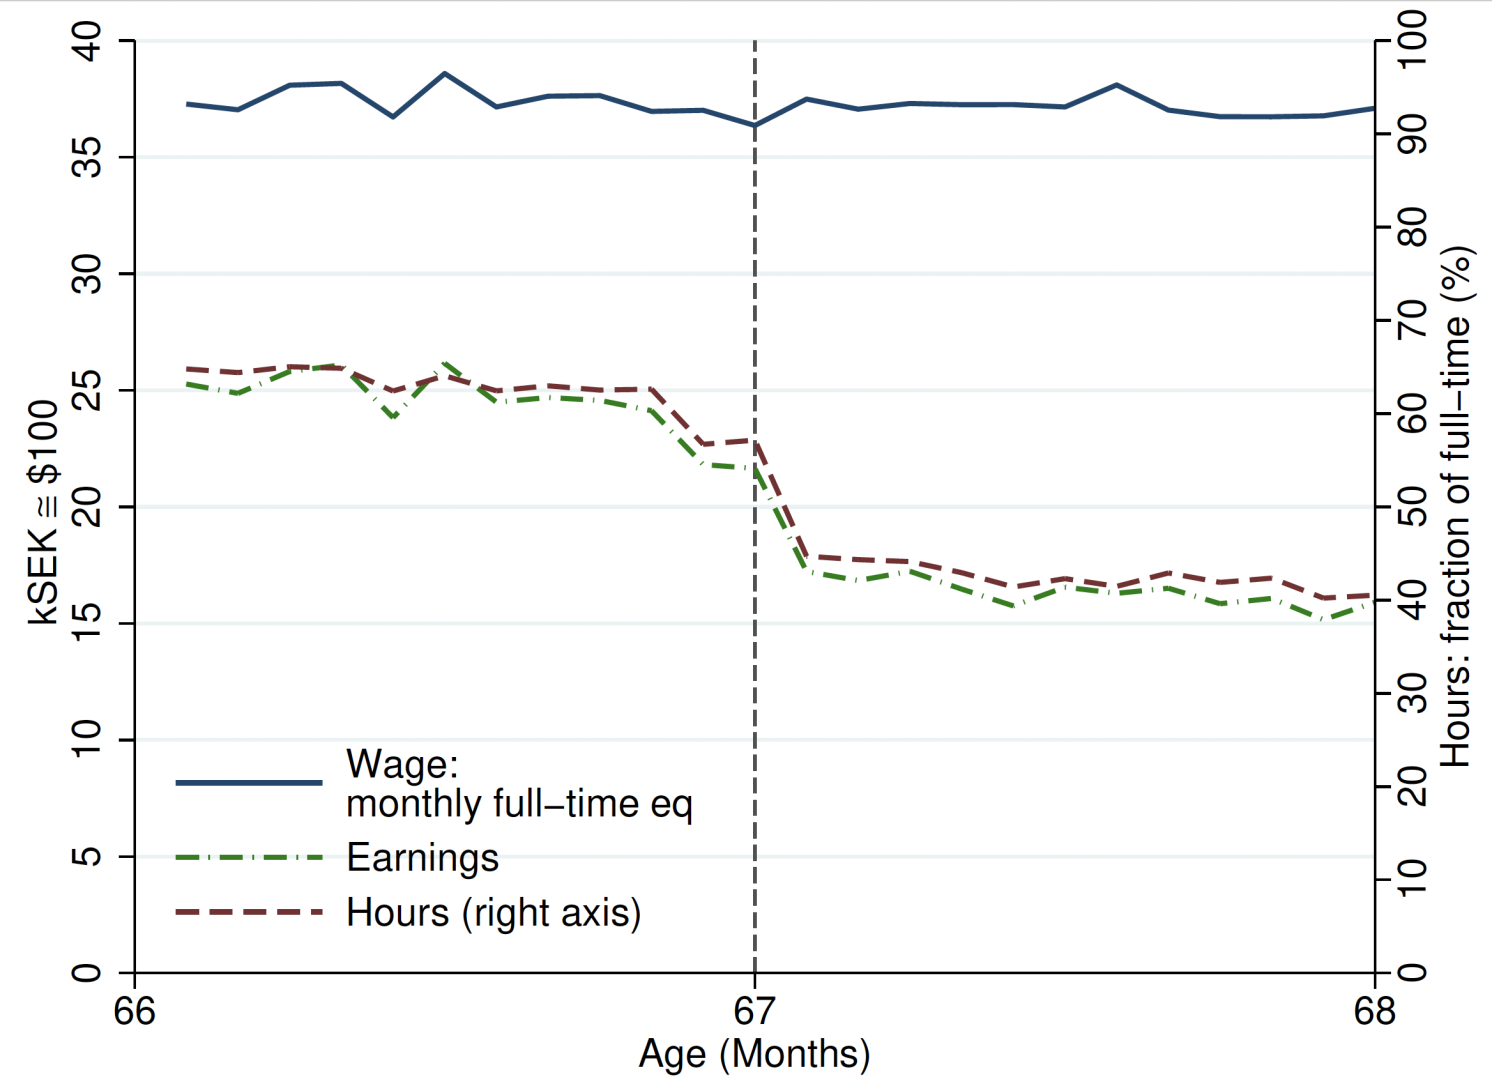 Figure 6 Panel analysis of stayers: Hours vs wages